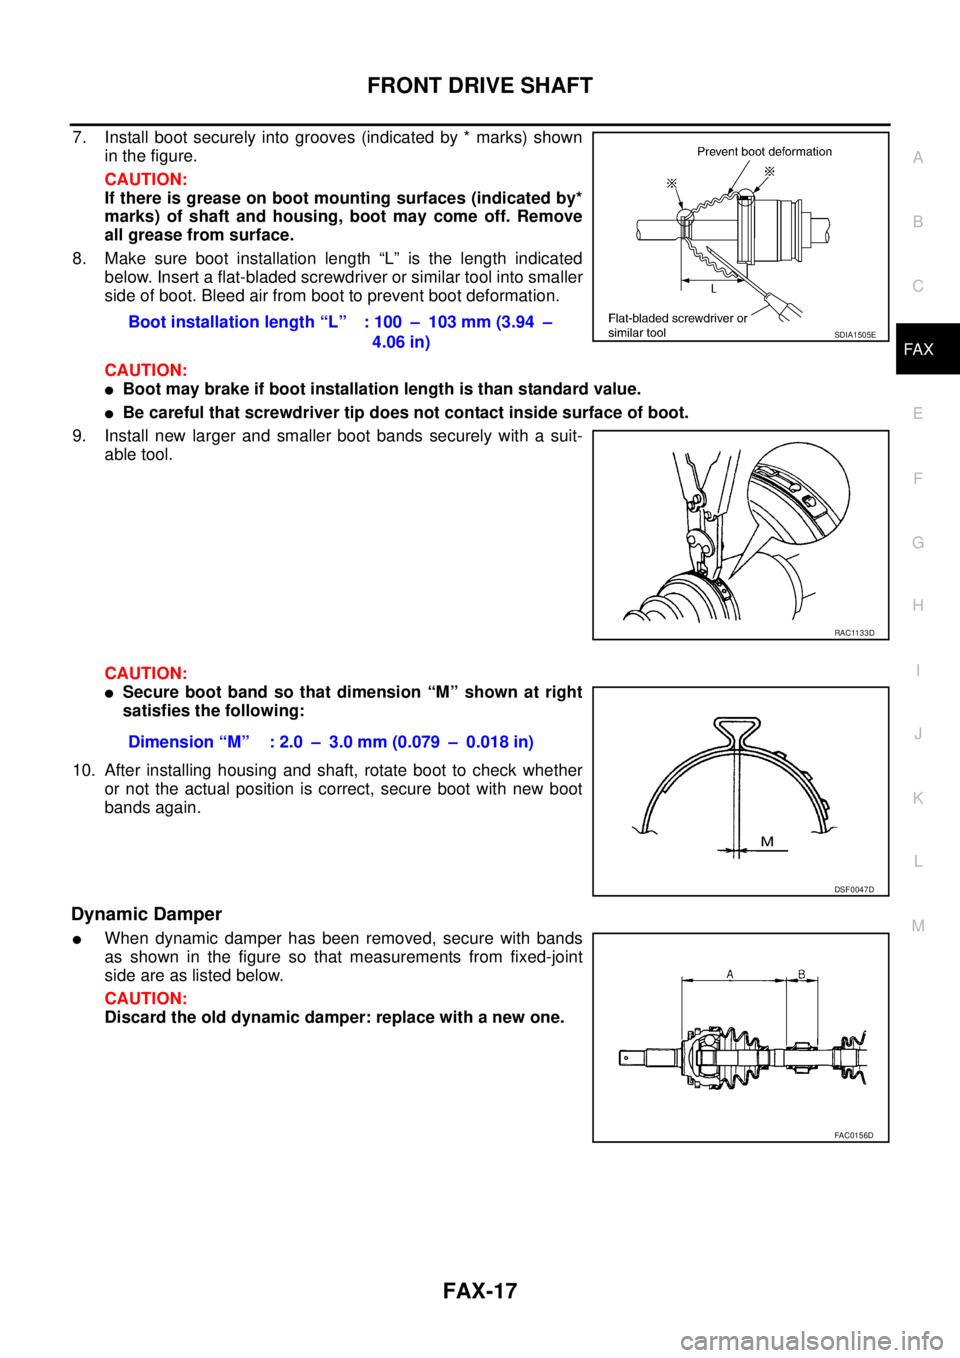 NISSAN X-TRAIL 2003  Service Repair Manual FRONT DRIVE SHAFT
FAX-17
C
E
F
G
H
I
J
K
L
MA
B
FA X
 
7. Install boot securely into grooves (indicated by * marks) shown
in the figure. 
CAUTION:
If there is grease on boot mounting surfaces (indicat